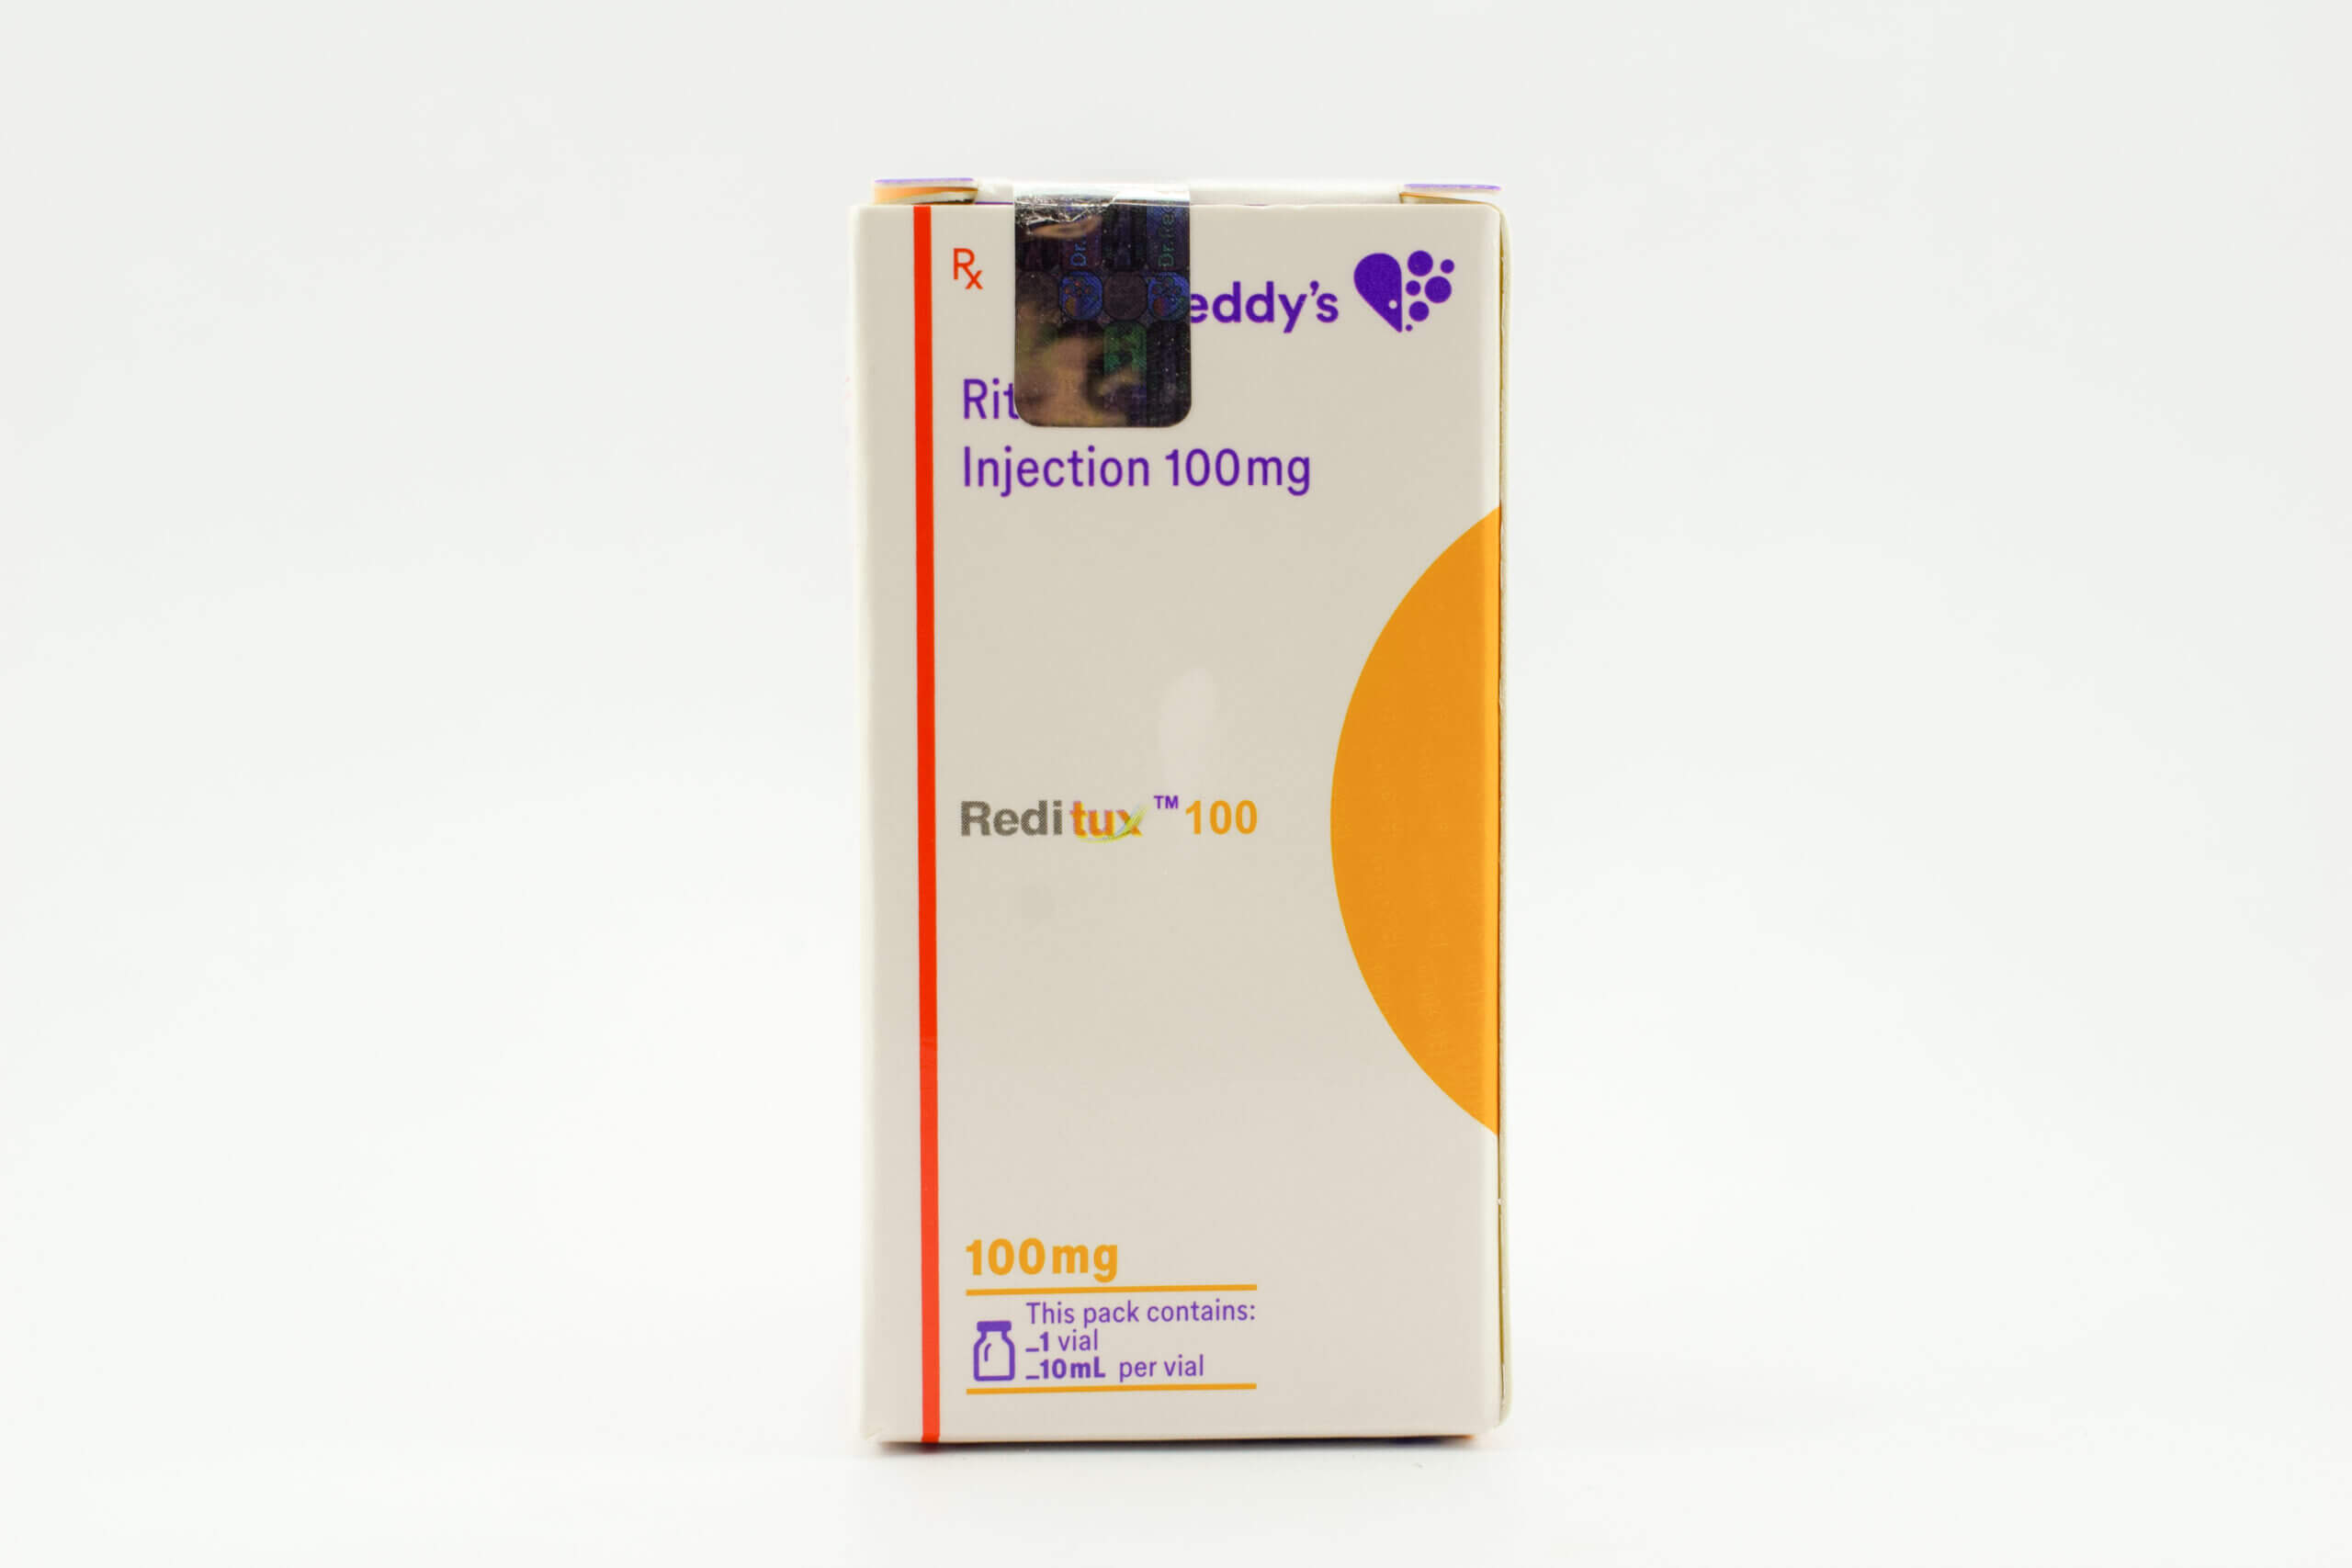 Reditux 100 Mg Injection